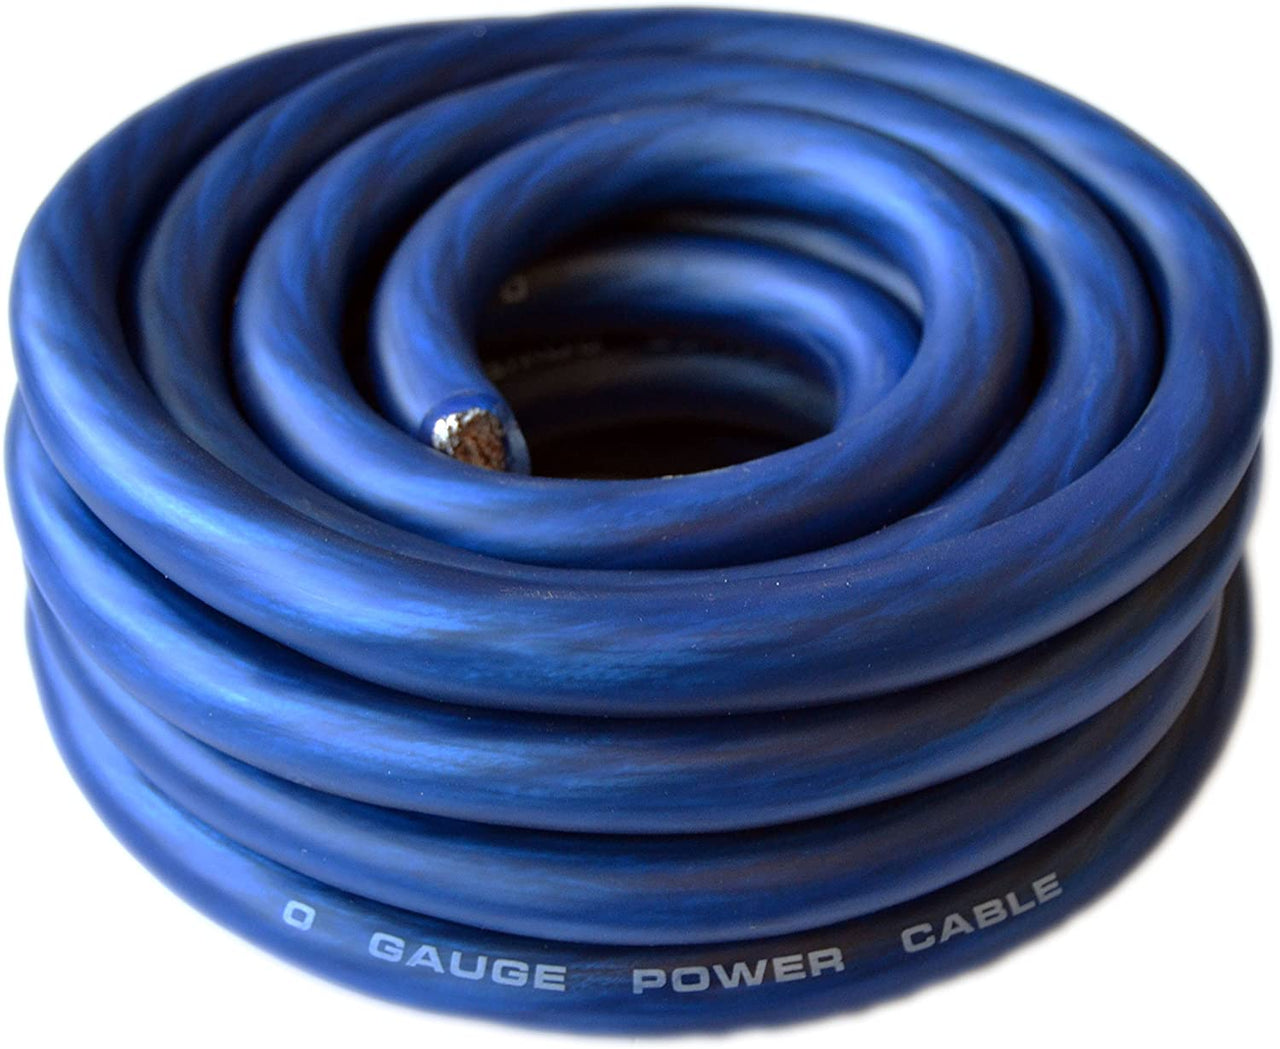 MK Audio 1/0 Gauge Blue 50ft Power/Ground Wire True Spec and Soft Touch Cable